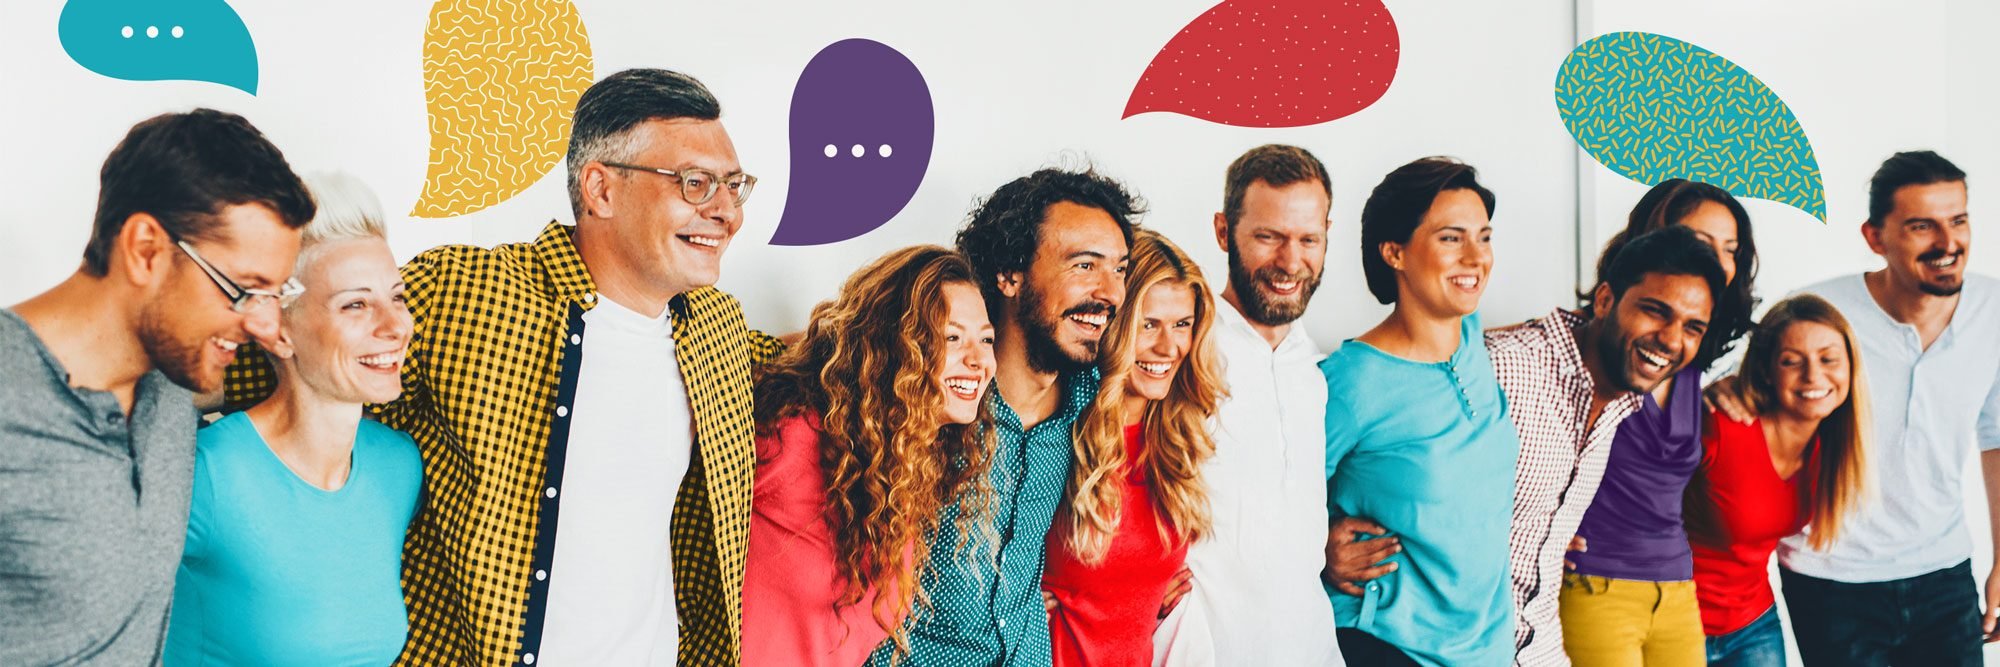 line of diverse happy people forming a community with stylized speech bubbles above some heads